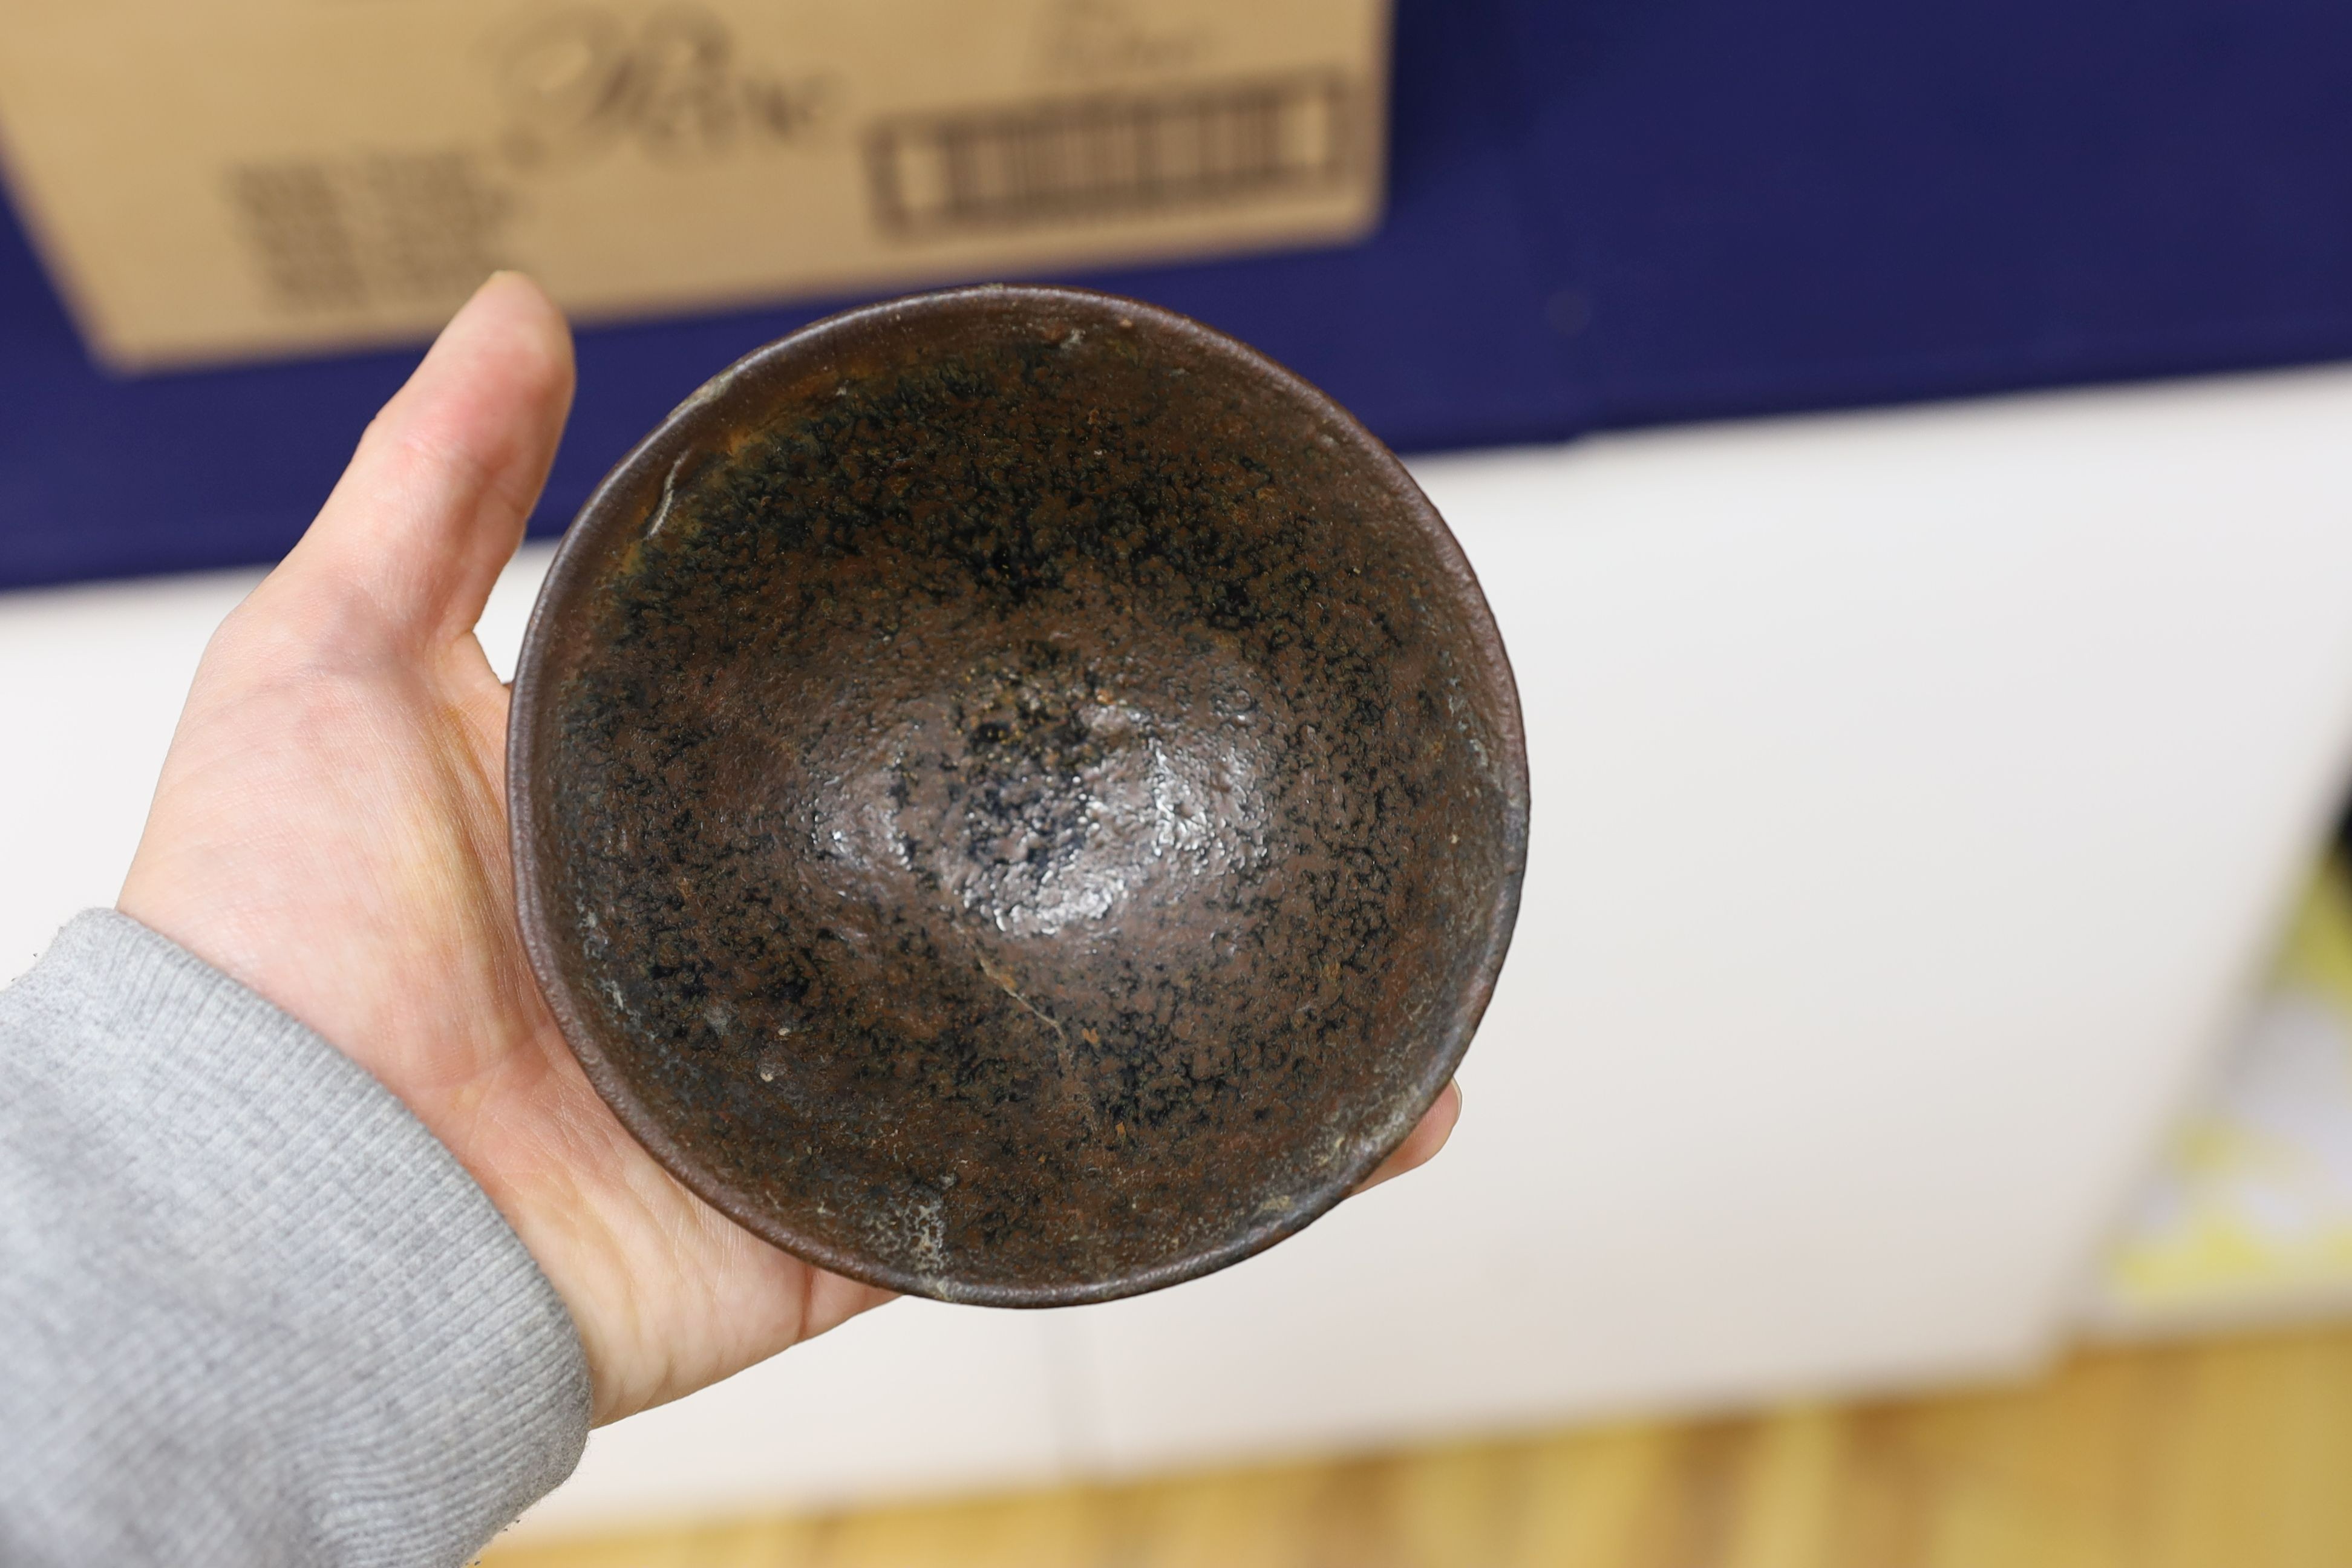 A group of Chinese Jian ware tea bowls, Song dynasty, largest 11.5 cms diameter, 7cm to 11.4cm diameter